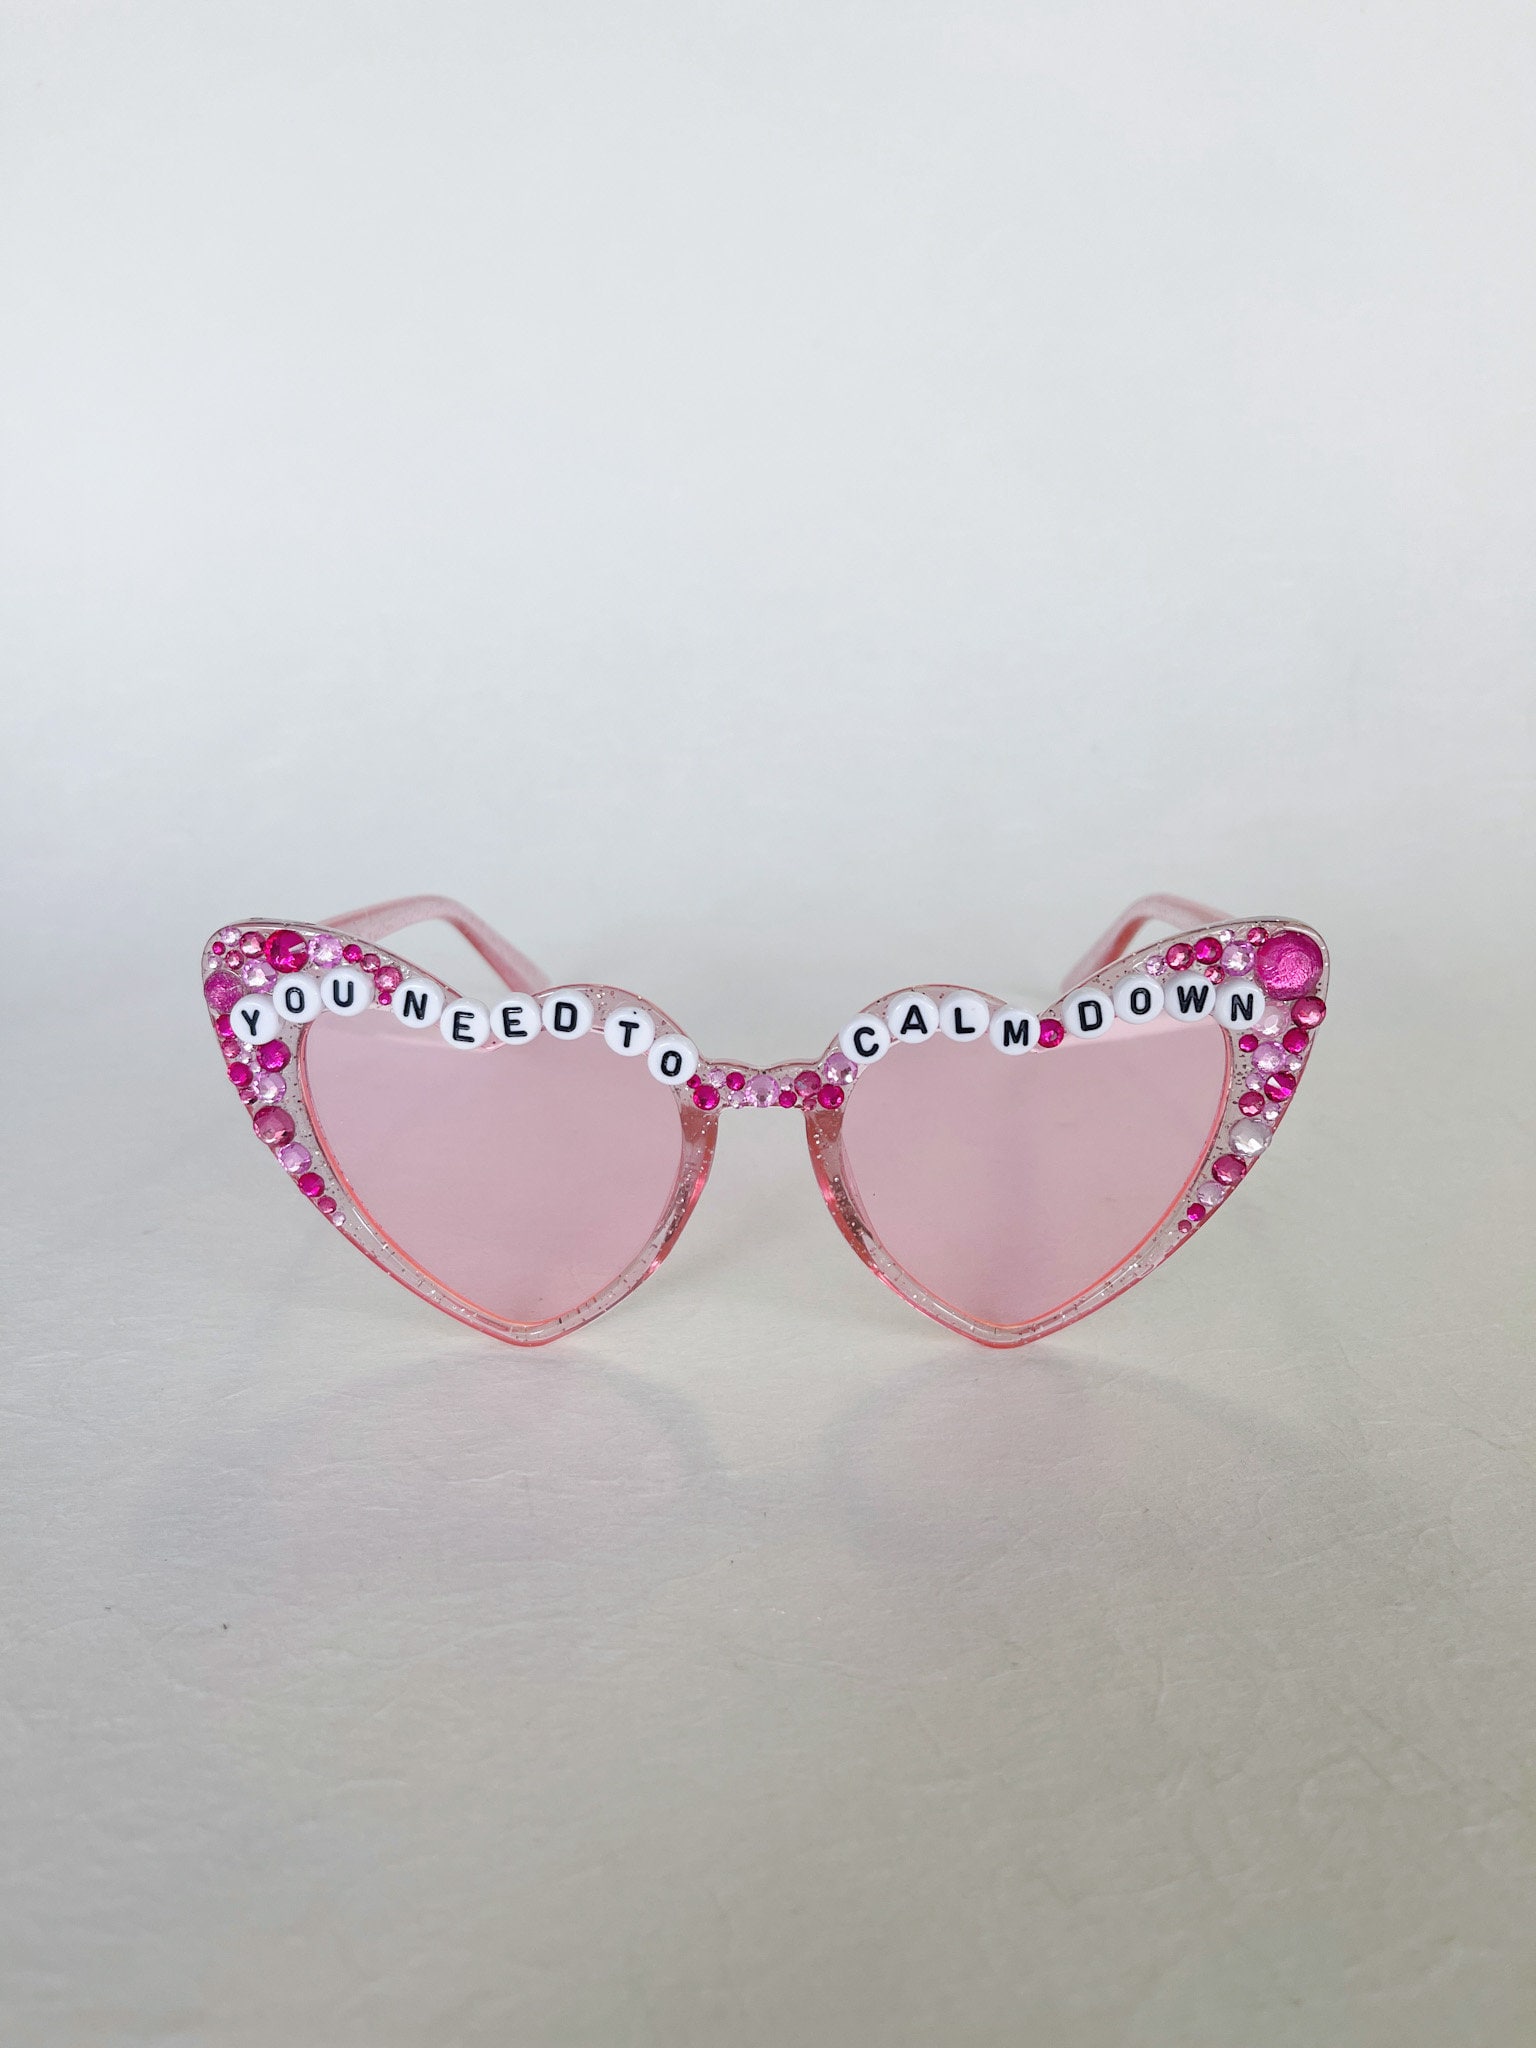 Red heart shaped frame glasses, Taylor Swift party favor - Accessories